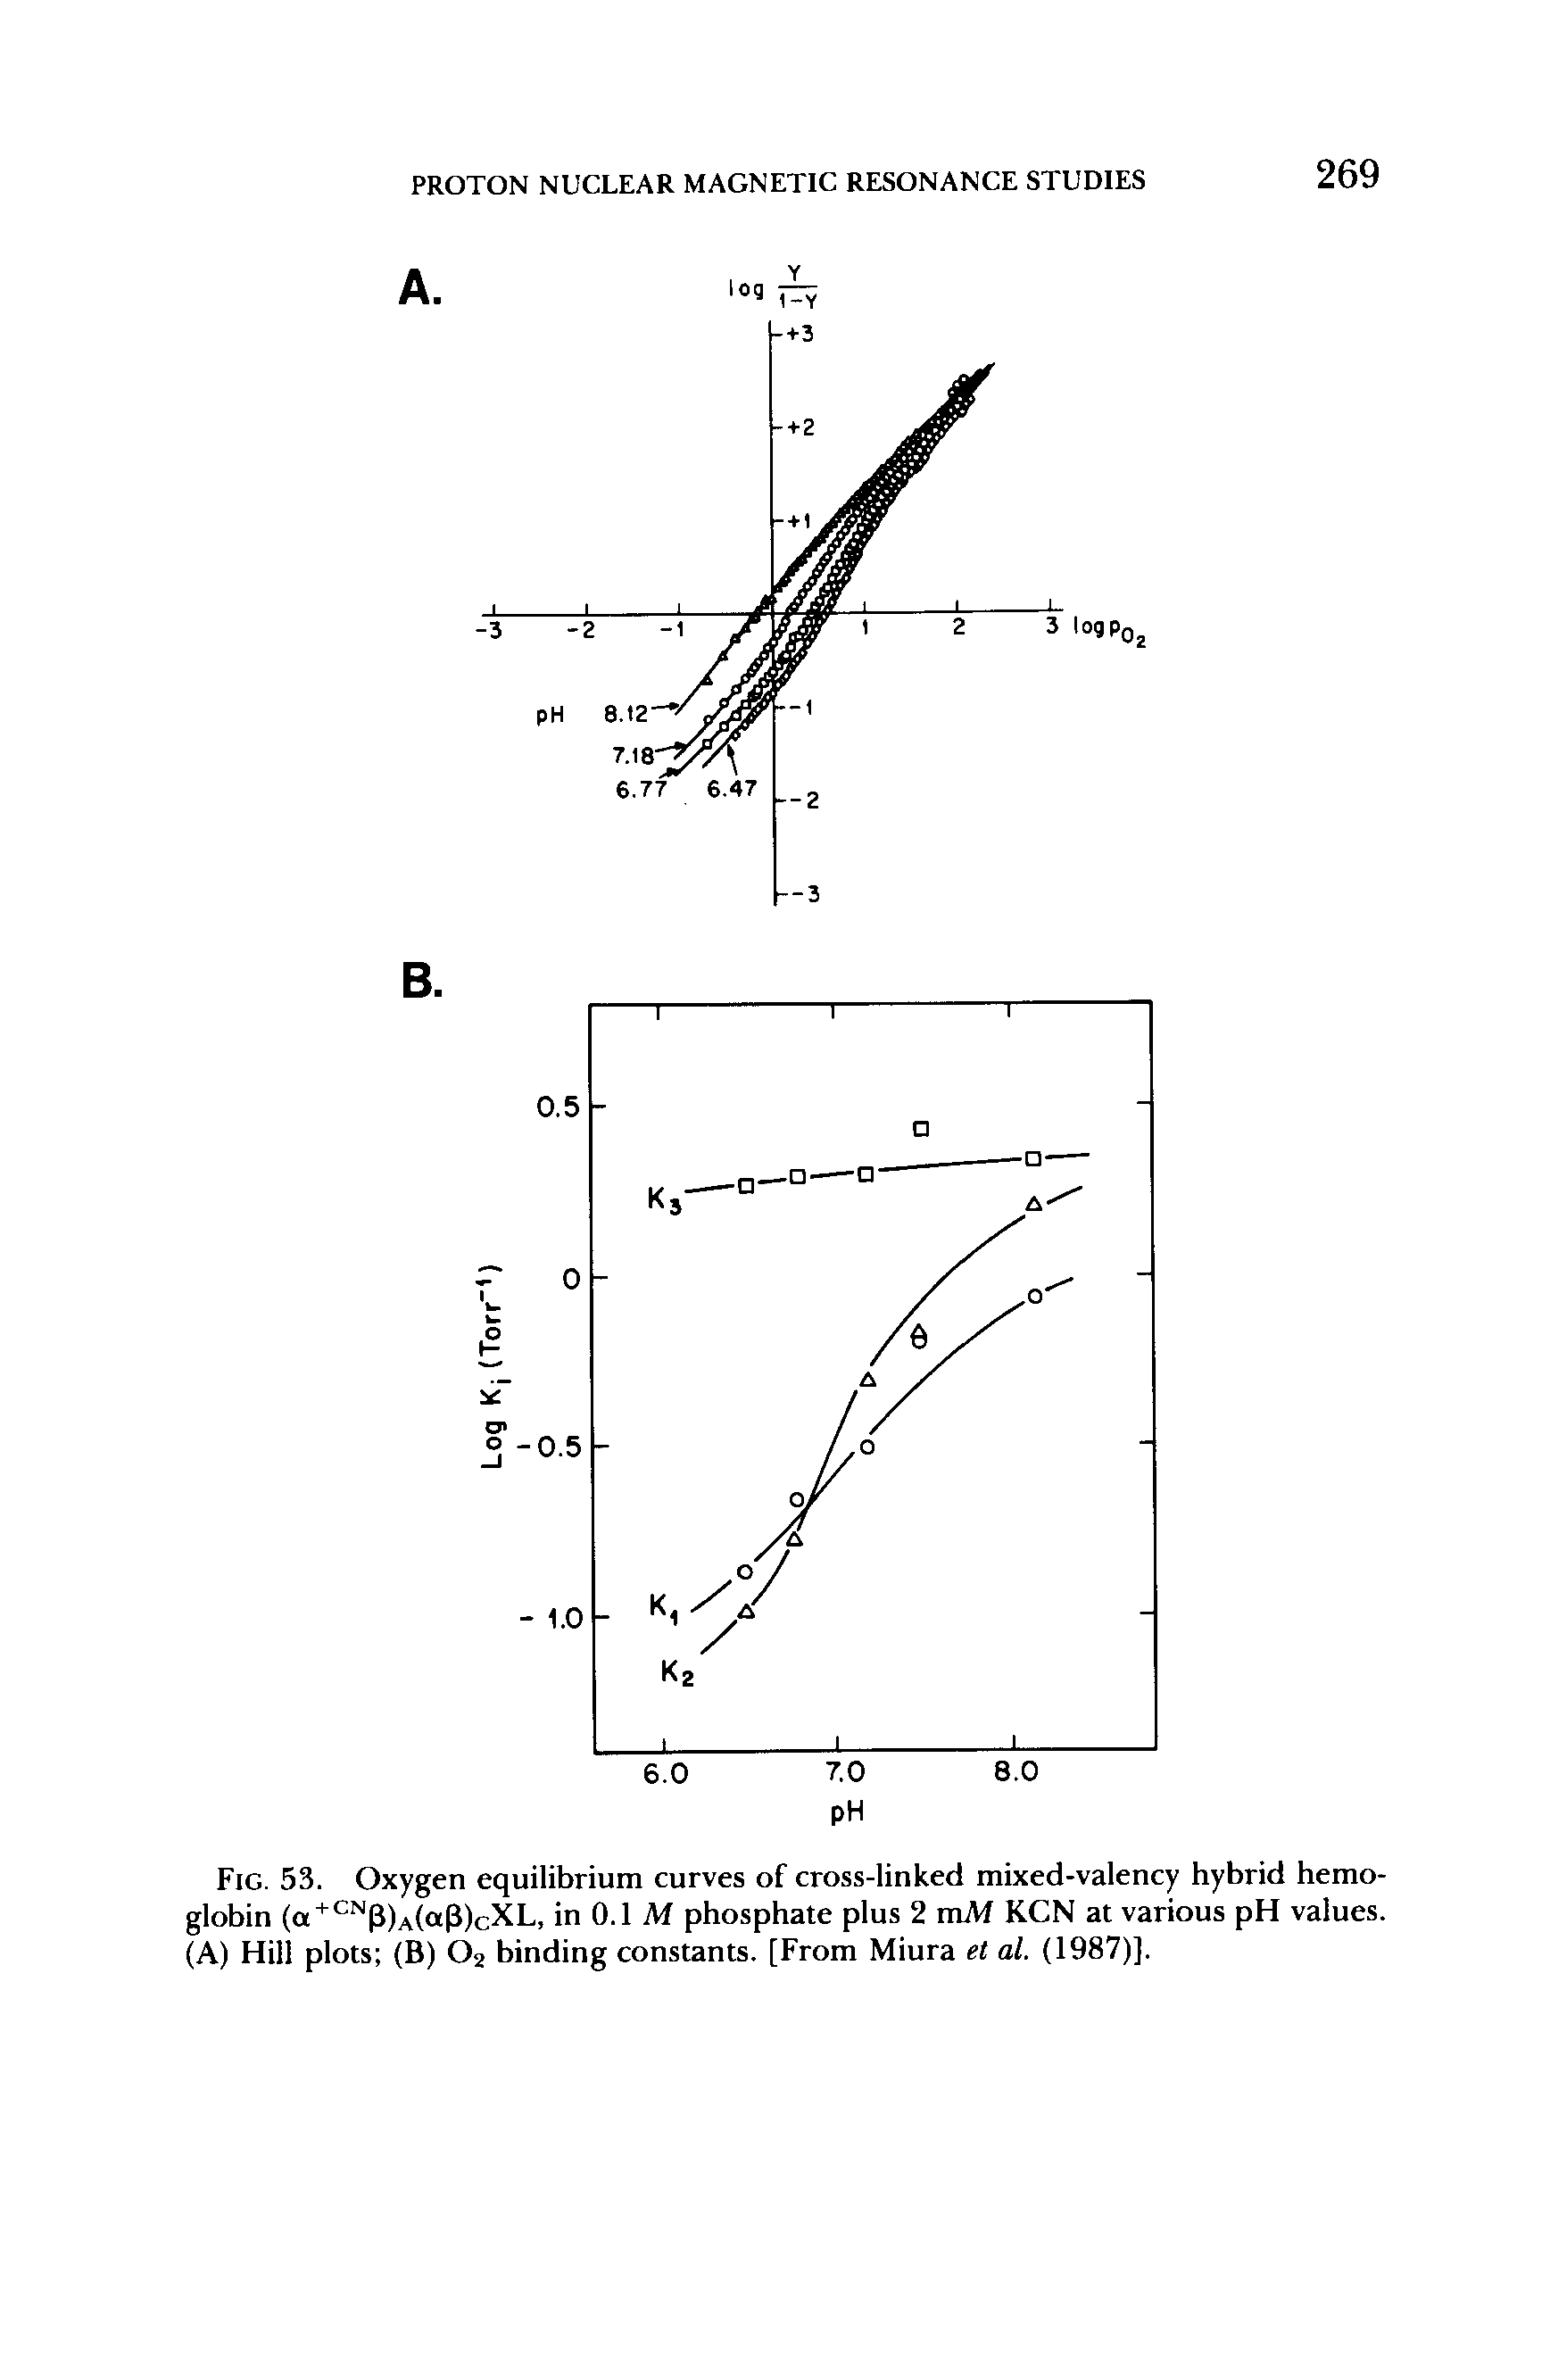 Fig. 53. Oxygen equilibrium curves of cross-linked mixed-valency hybrid hemoglobin (a + CN3)A(ap)cXL, in 0.1 M phosphate plus 2 mM KCN at various pH values. (A) Hill plots (B) 02 binding constants. [From Miura et al. (1987)].